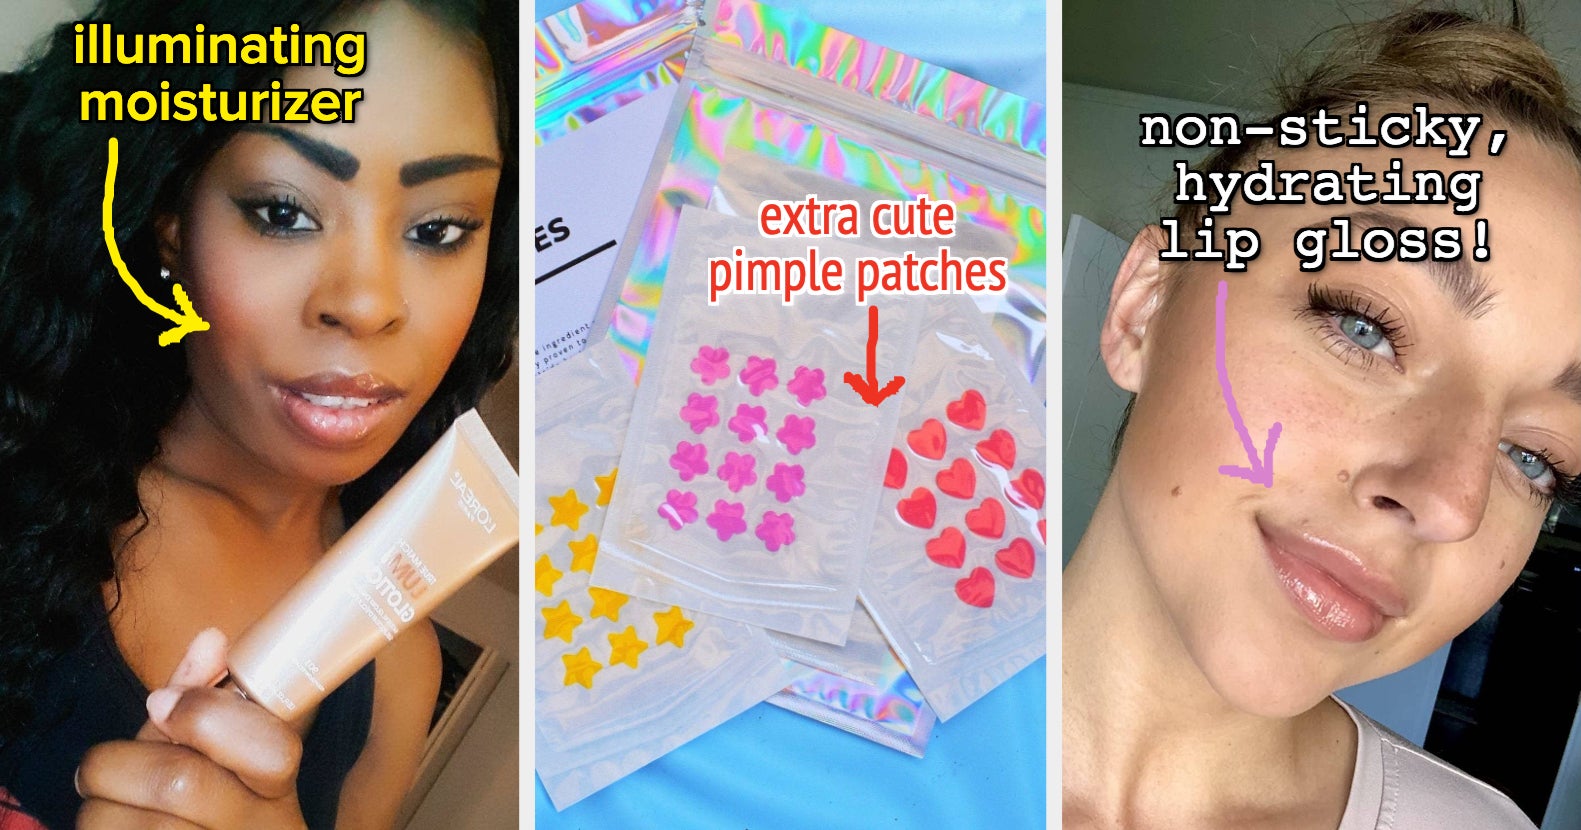 15 Beauty Products to Channel “Mean Girls” '00s Glam